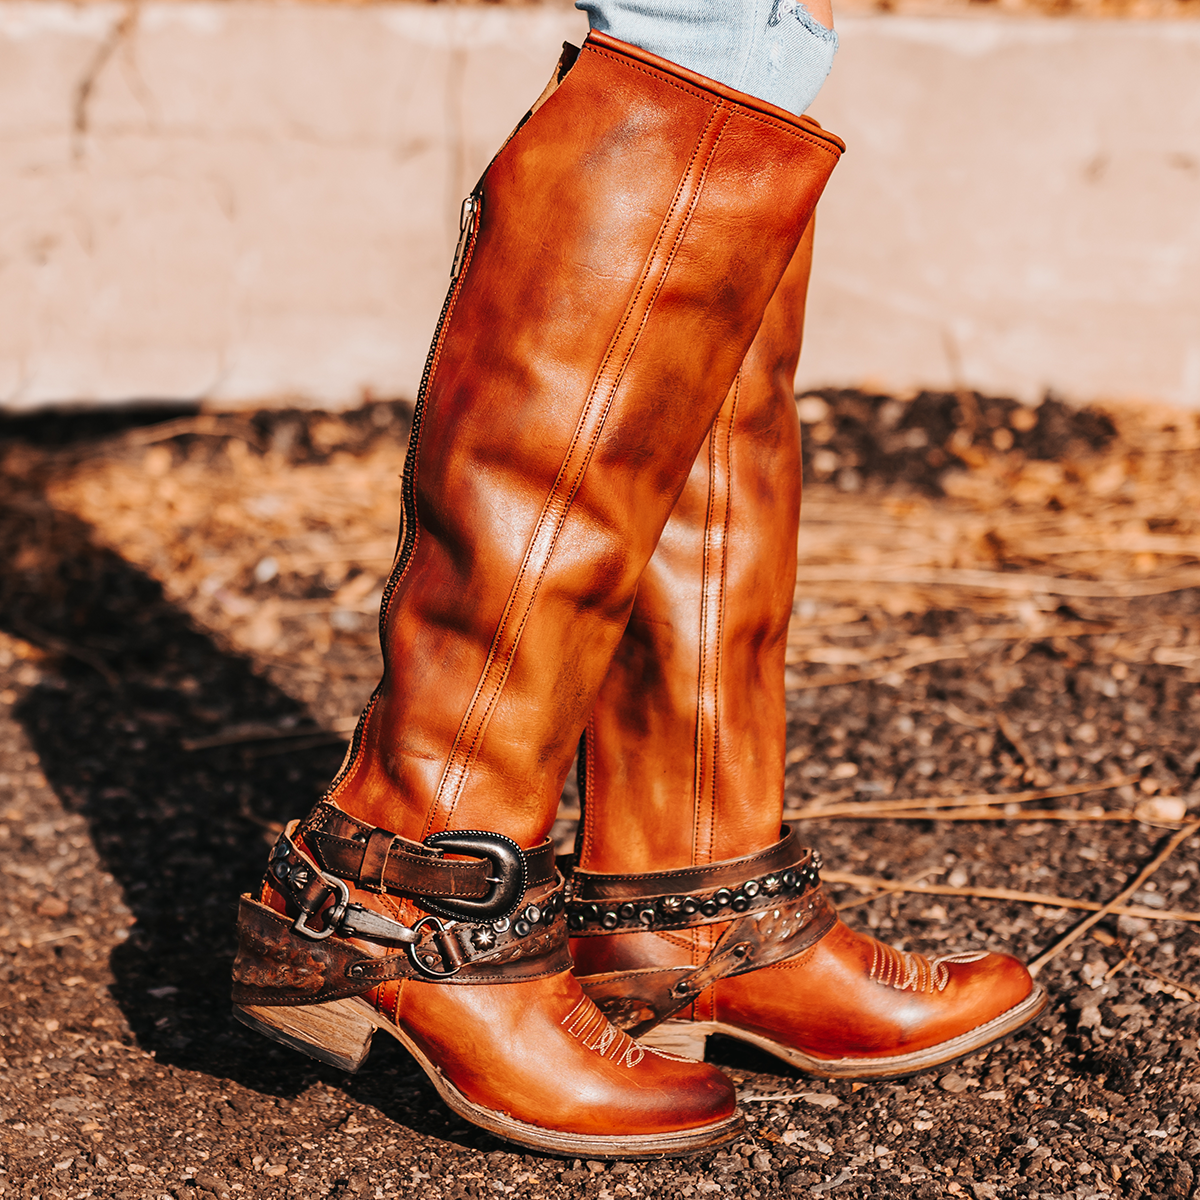 FREEBIRD women's Rodondo whiskey boot featuring a a relaxed silhouette, low heel, and mixed metal buckles